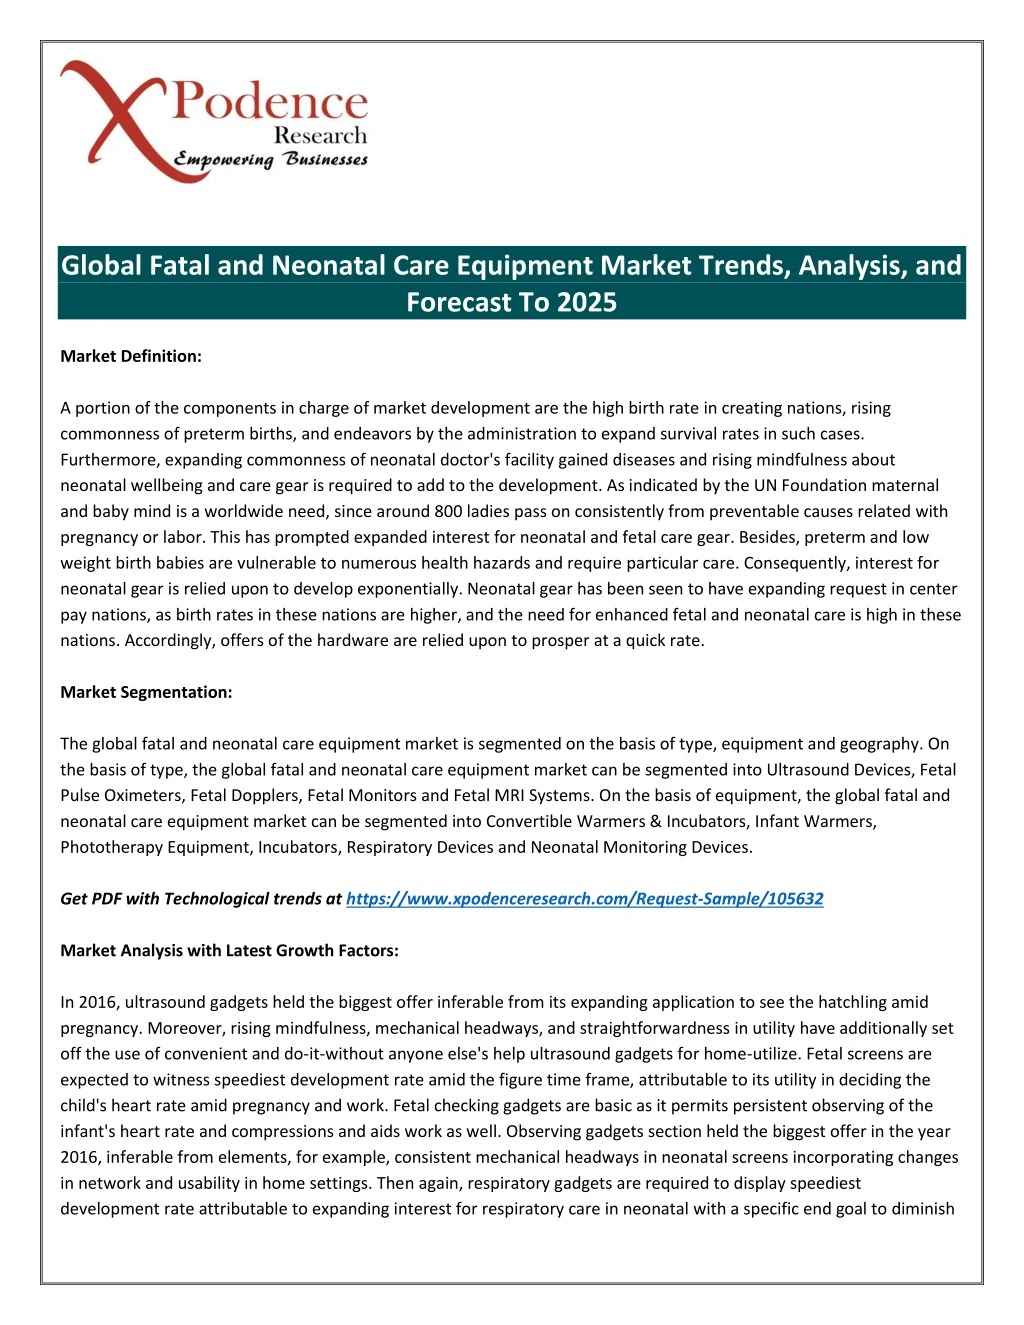 global fatal and neonatal care equipment market